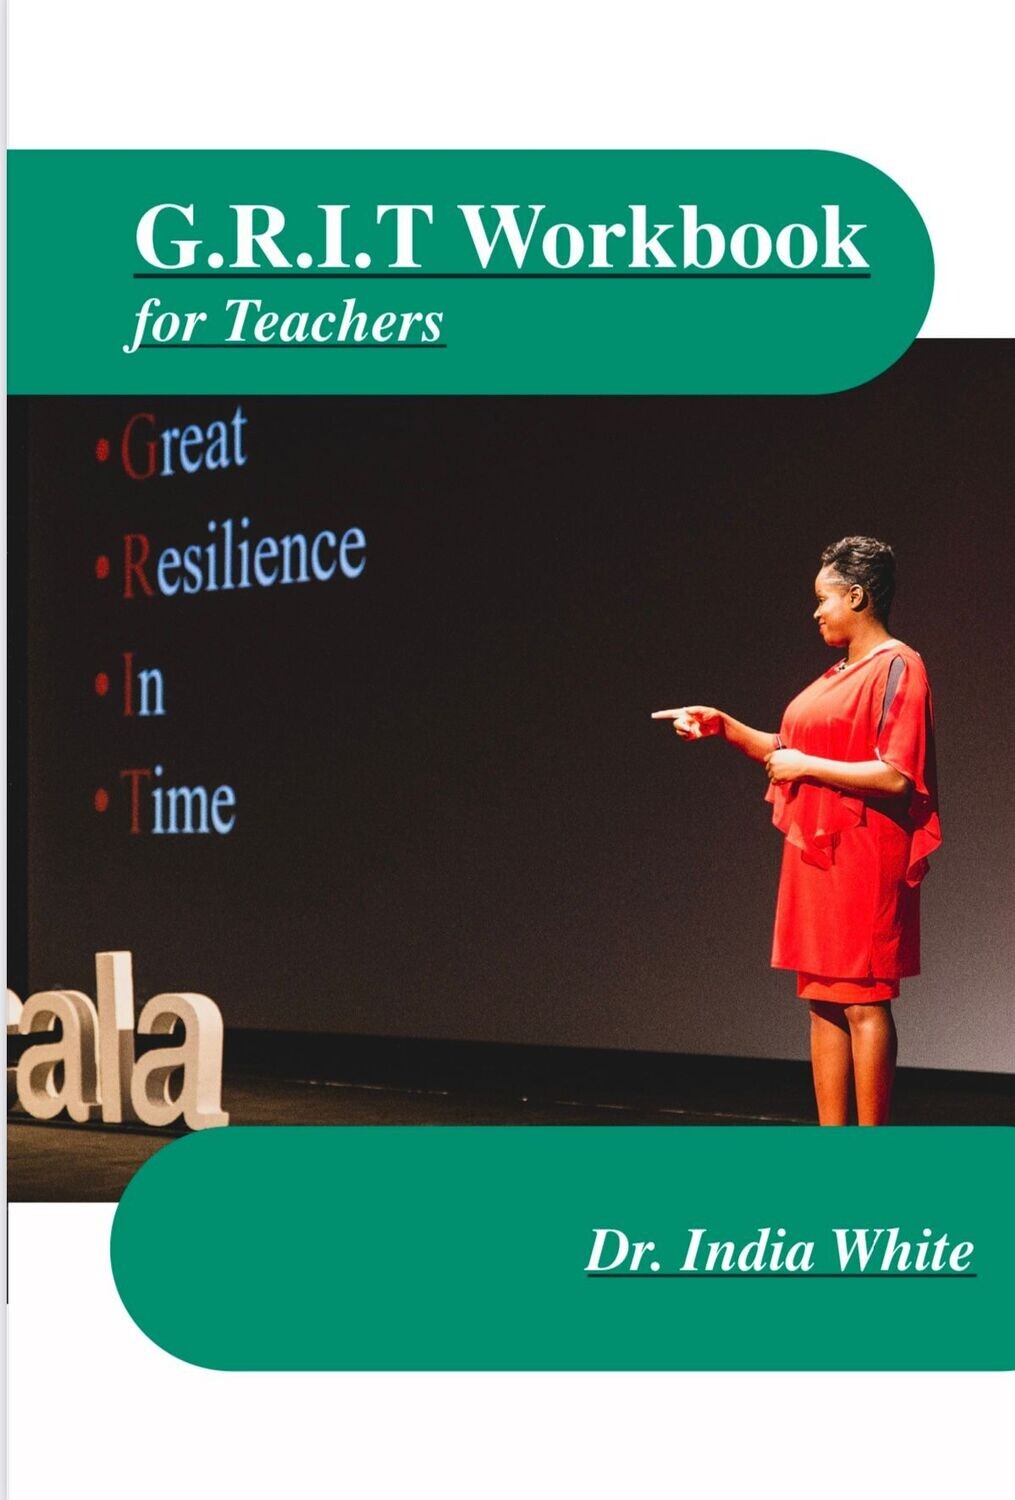 G.R.I.T. Master Class with Dr. India White: For Teachers! Discount!